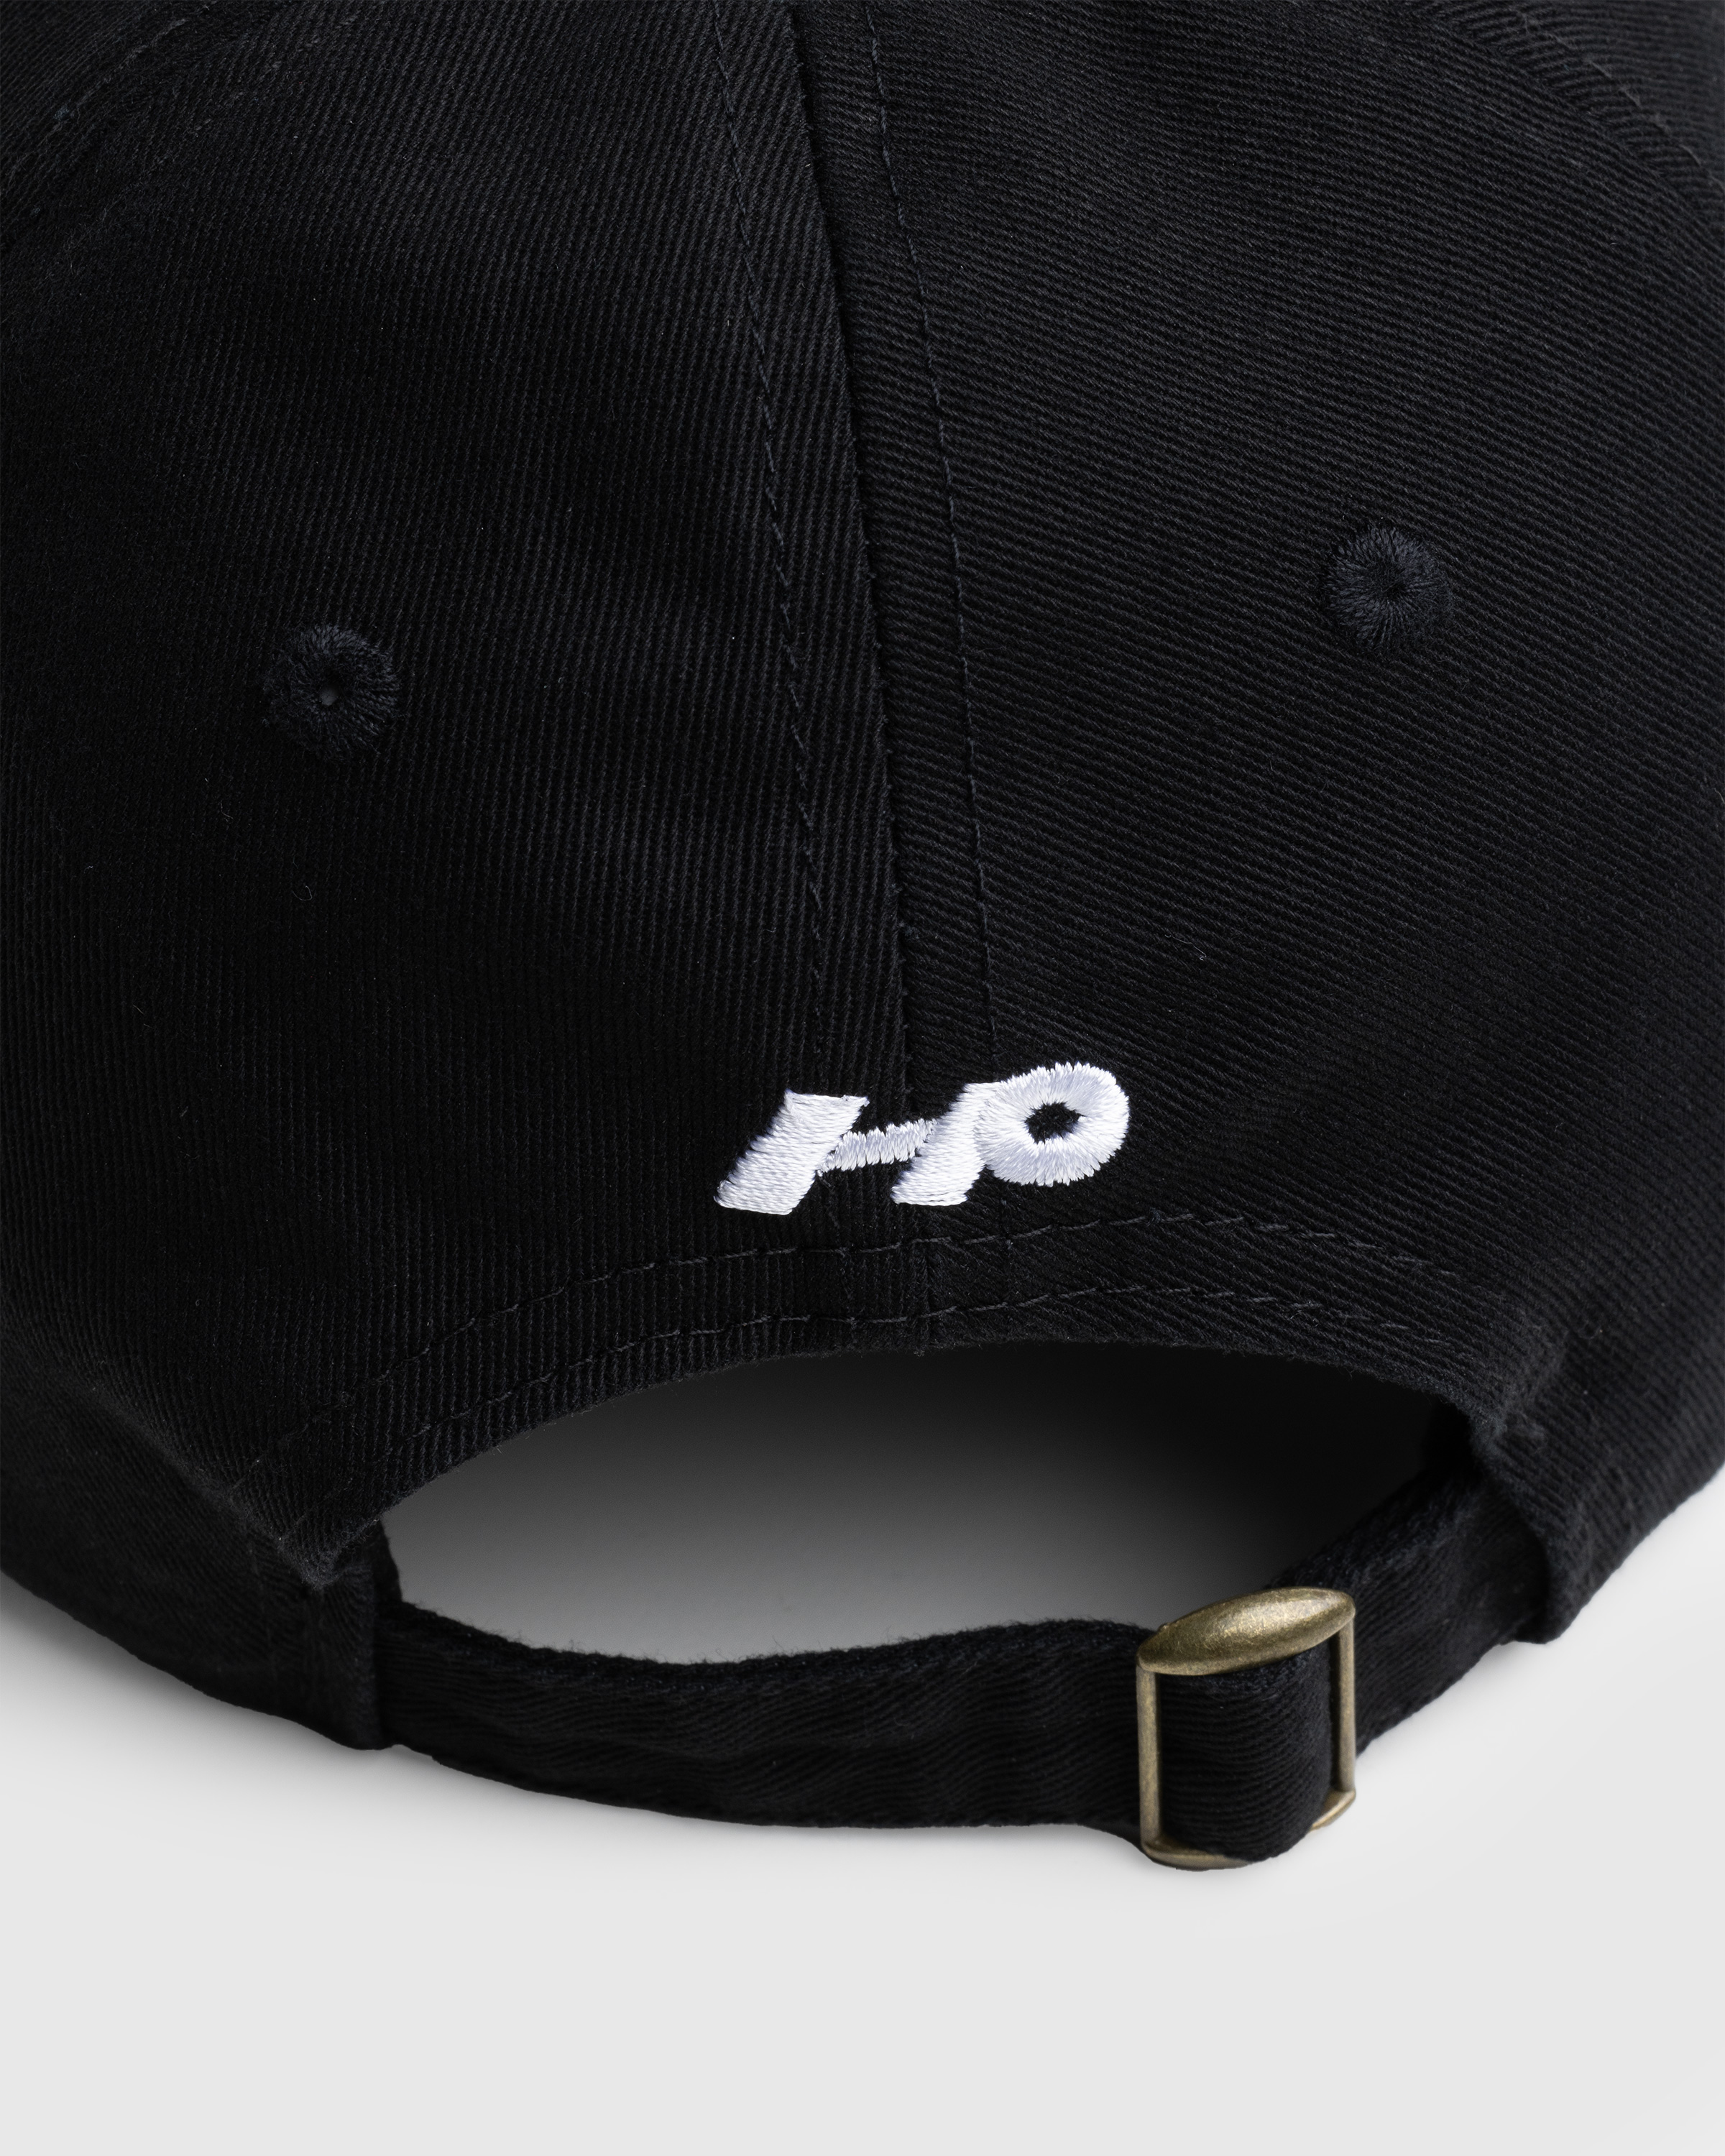 HO HO COCO – Late For Work Hat Black/White - Caps - Black - Image 5